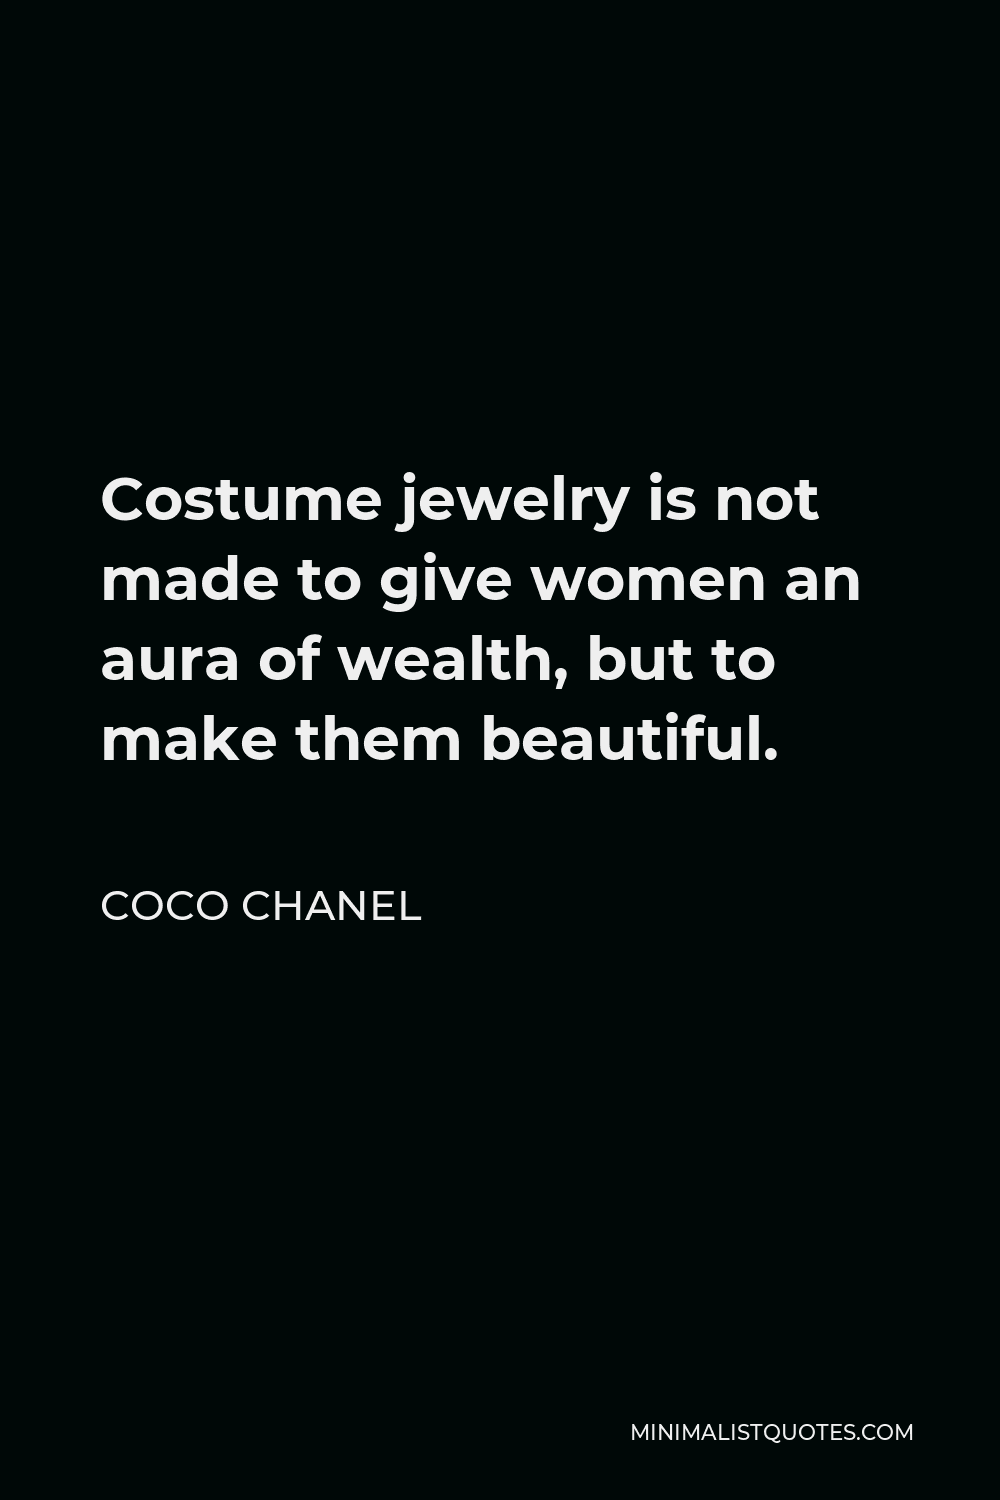 34 Best Coco Chanel Quotes, History & Life - Paisley & Sparrow